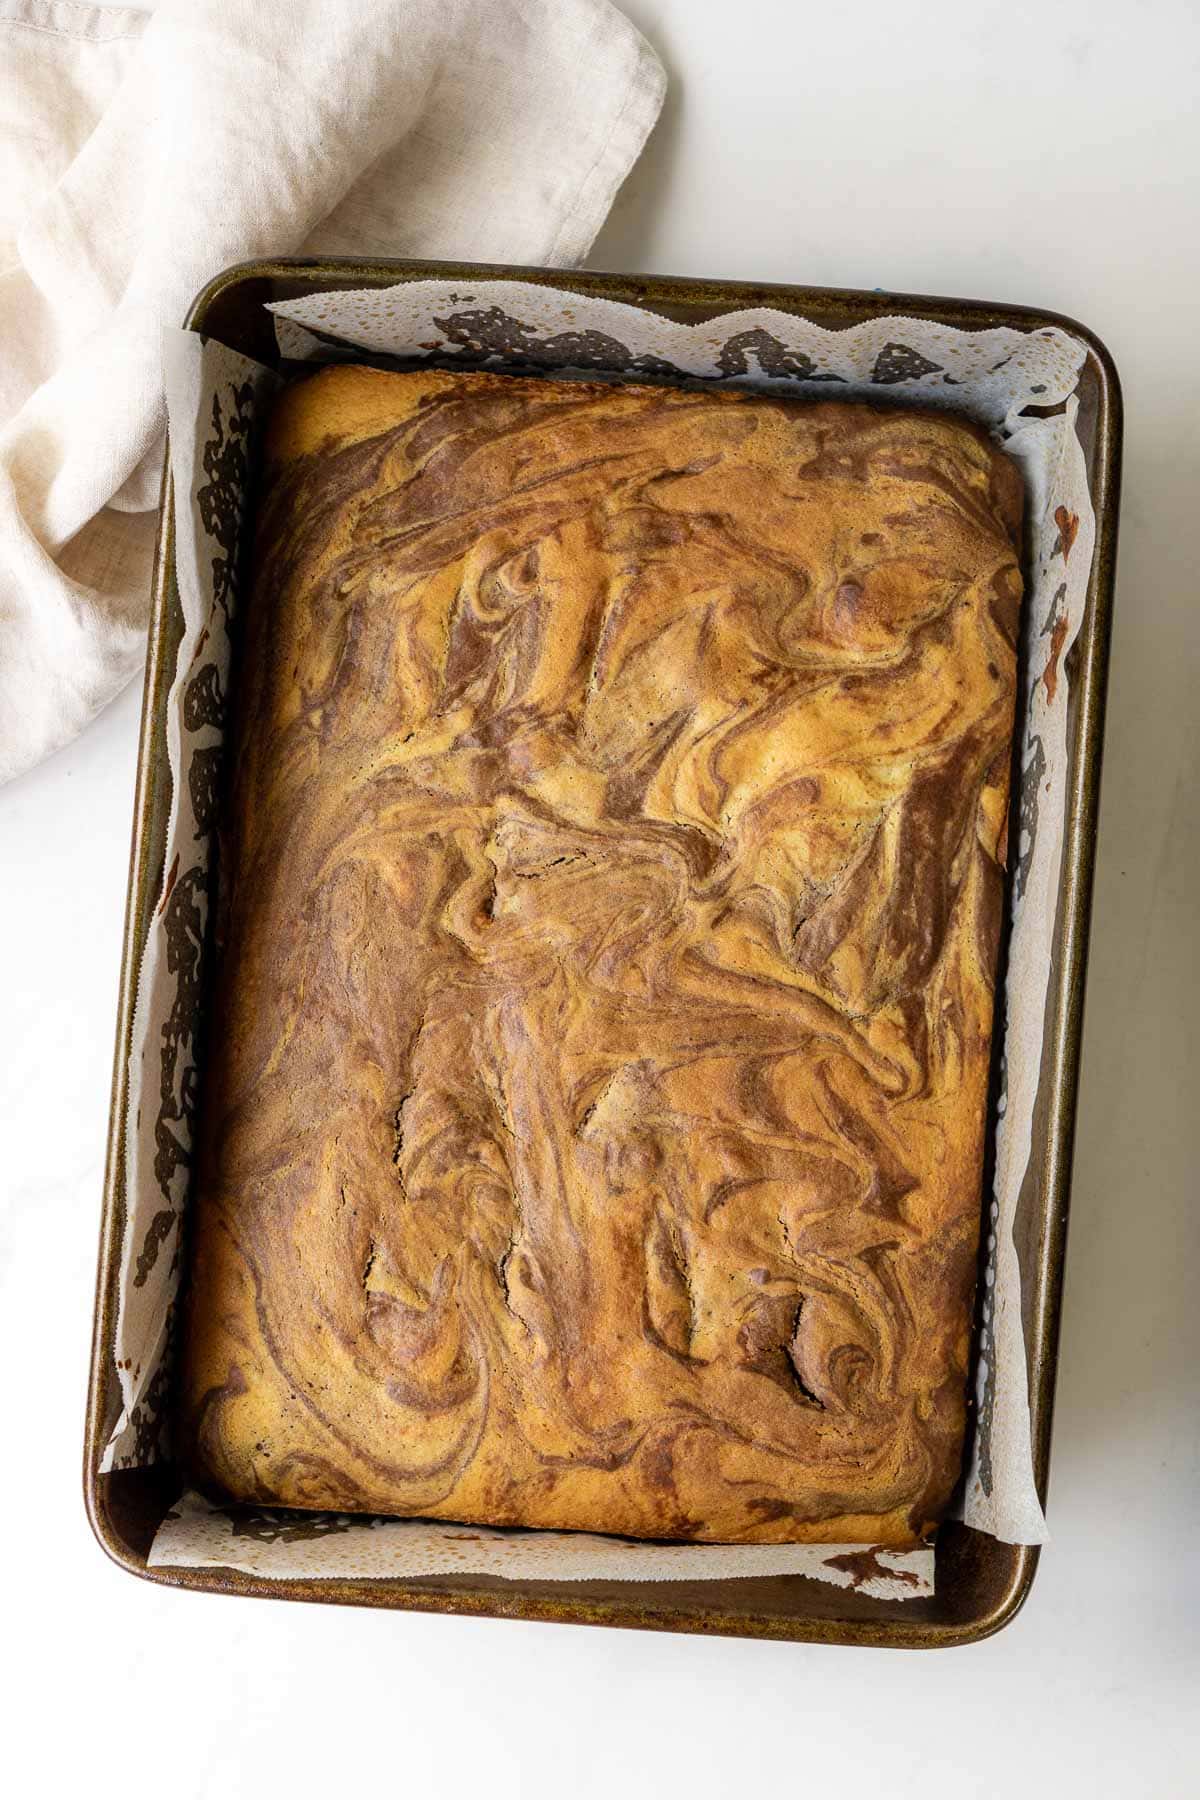 Just baked marble sheet cake still in the pan